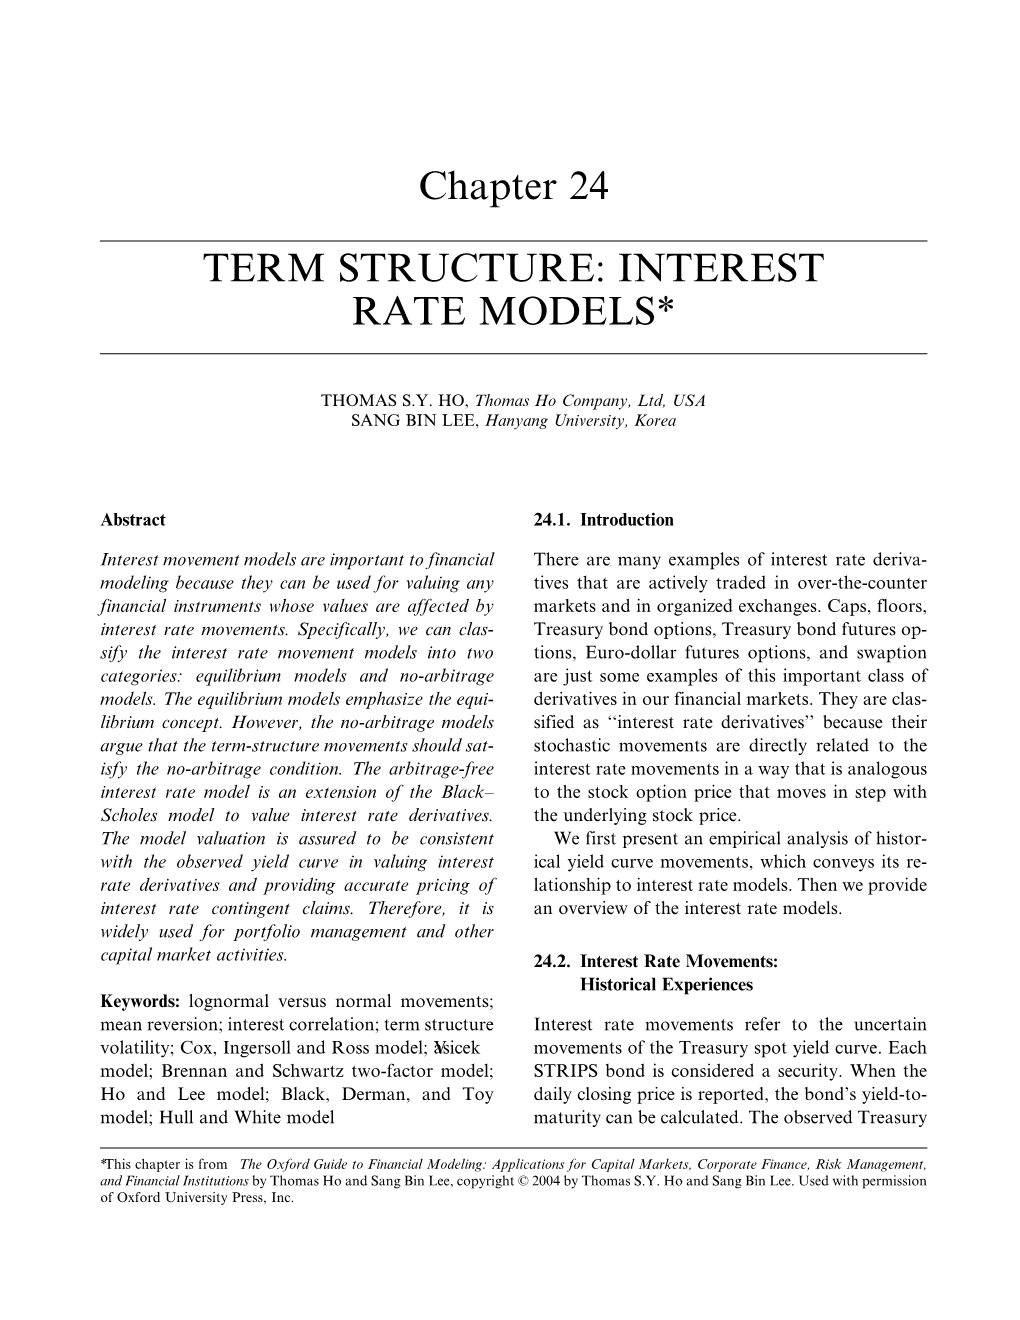 Chapter 24 TERM STRUCTURE: INTEREST RATE MODELS*